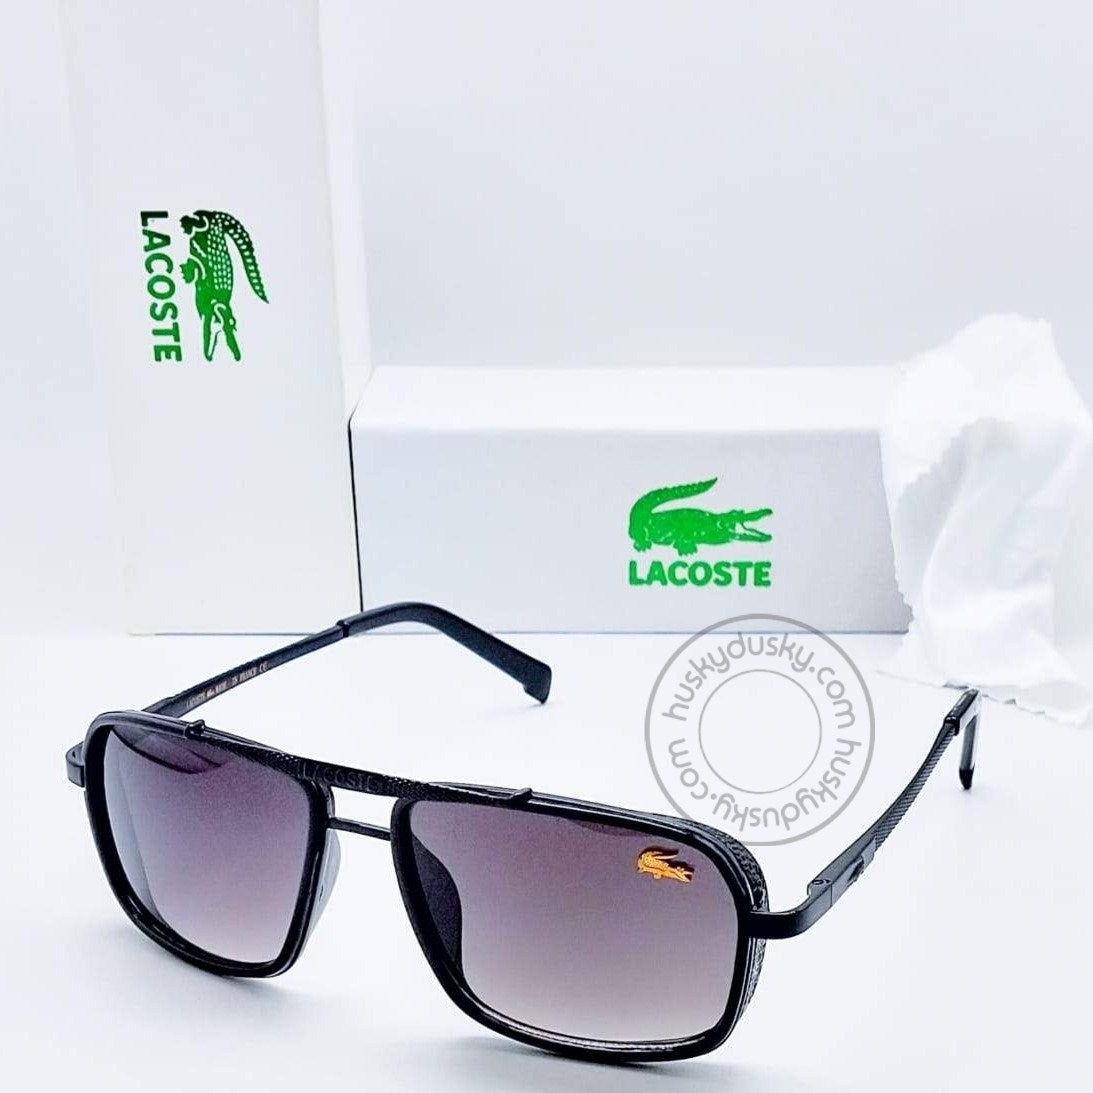 Lacoste Branded Purple Glass Men's Sunglass For Man With Balck Frame LS-555 Gift Sunglass